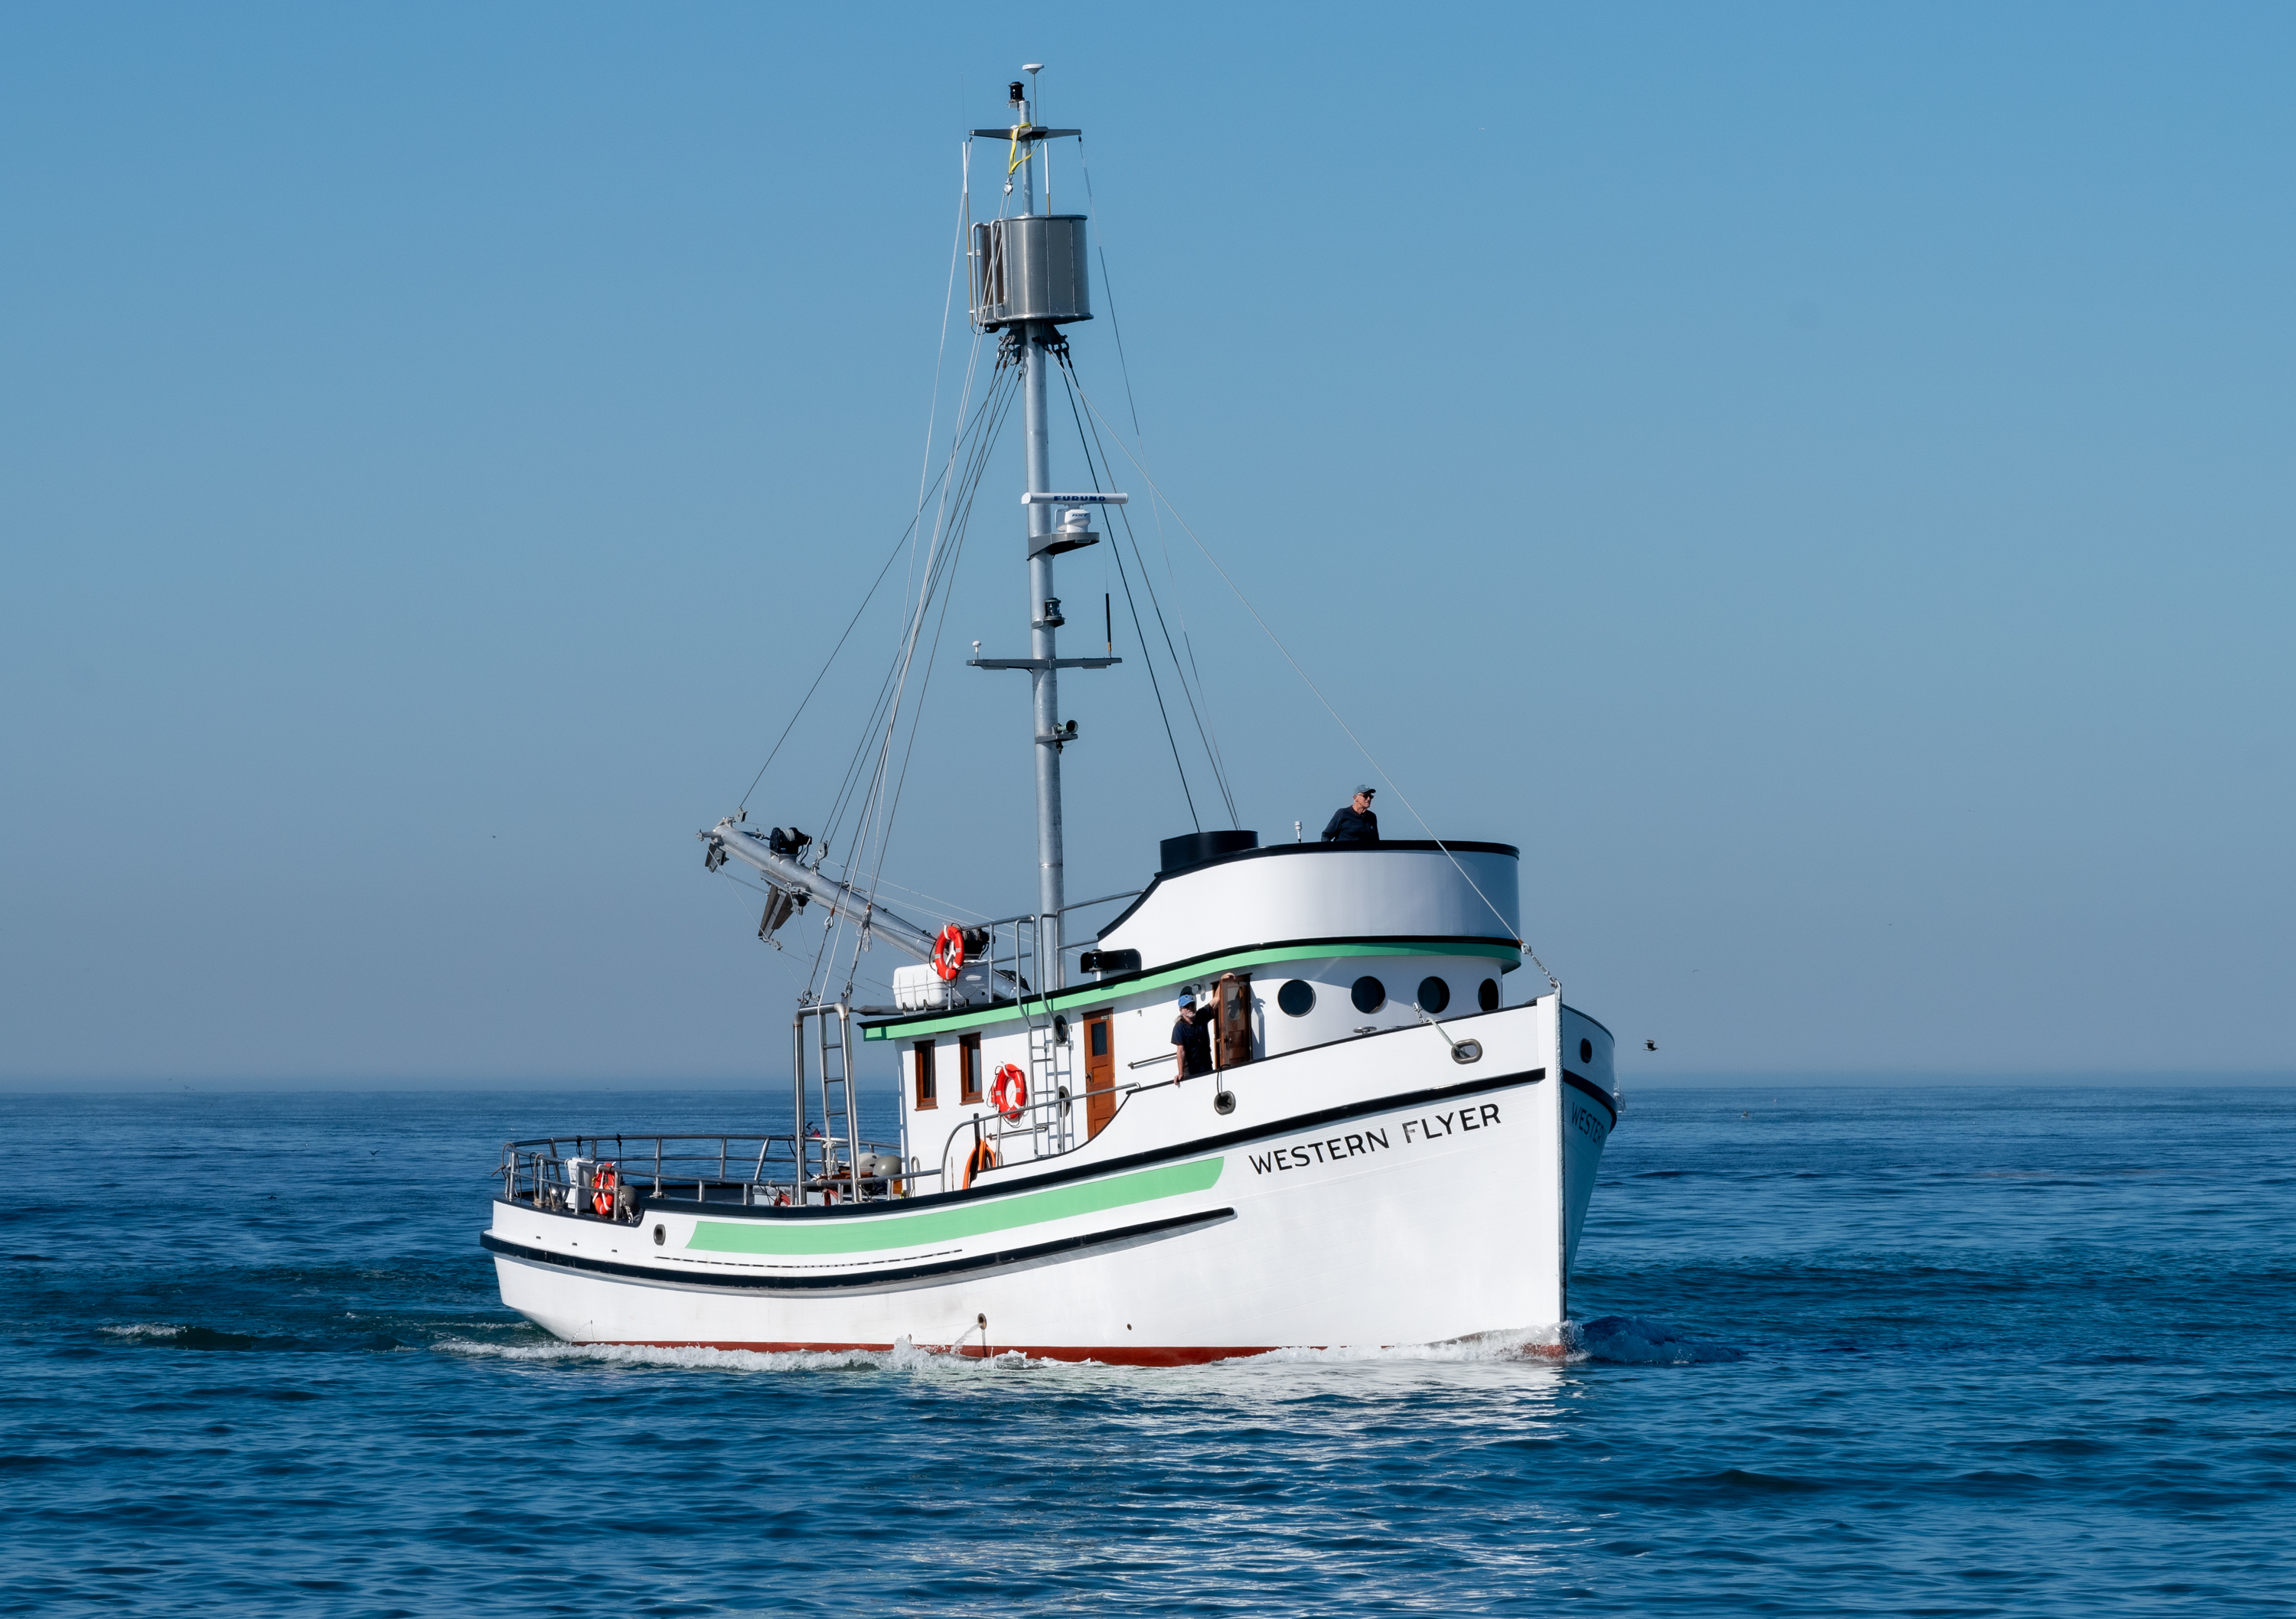 Historic Western Flyer Fishing Boat coming home to Monterey